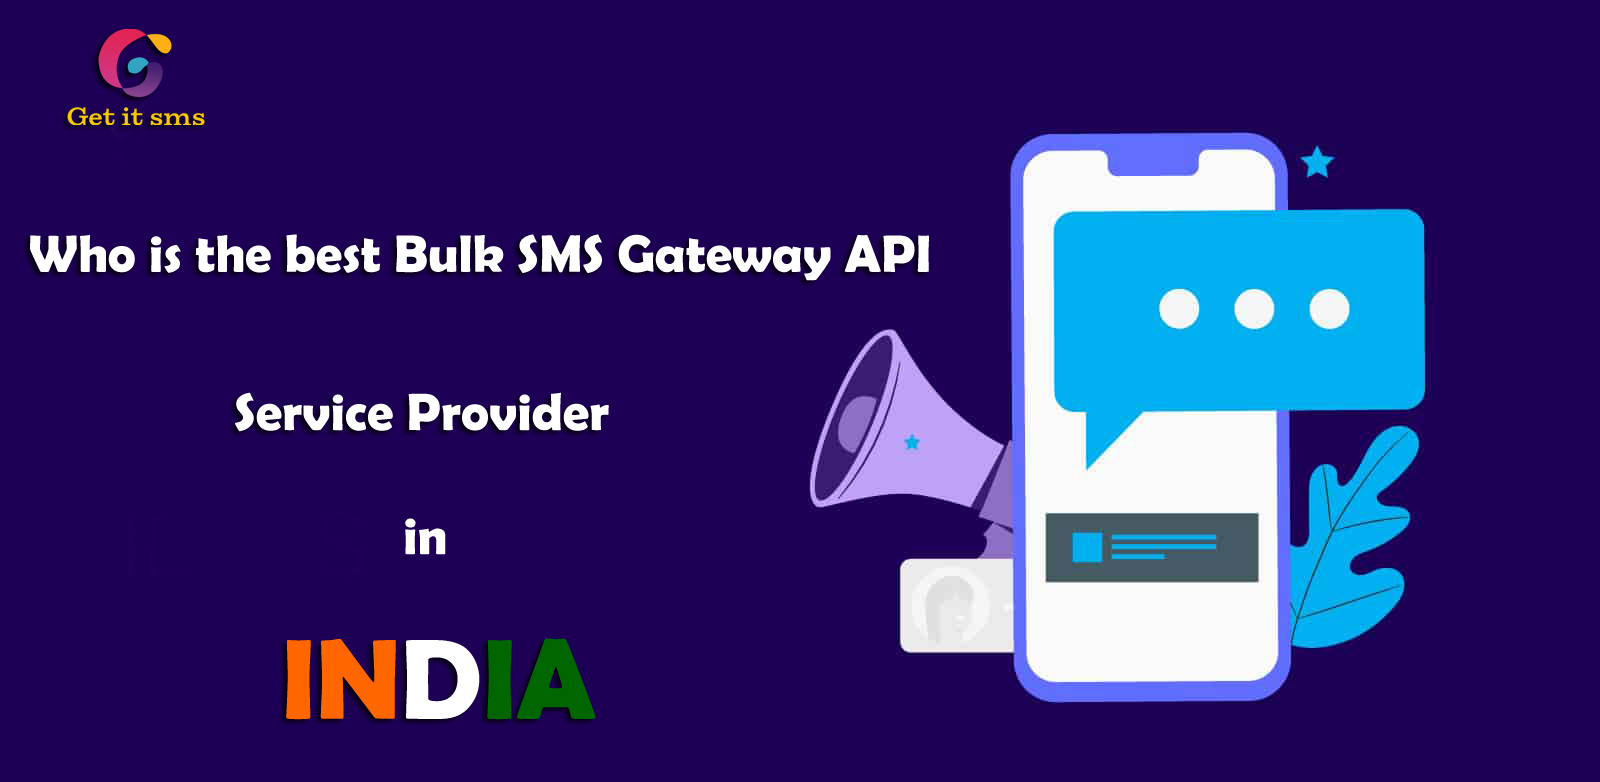 Who Is The Best Bulk SMS Gateway API Service Provider in India? - GetItSMS